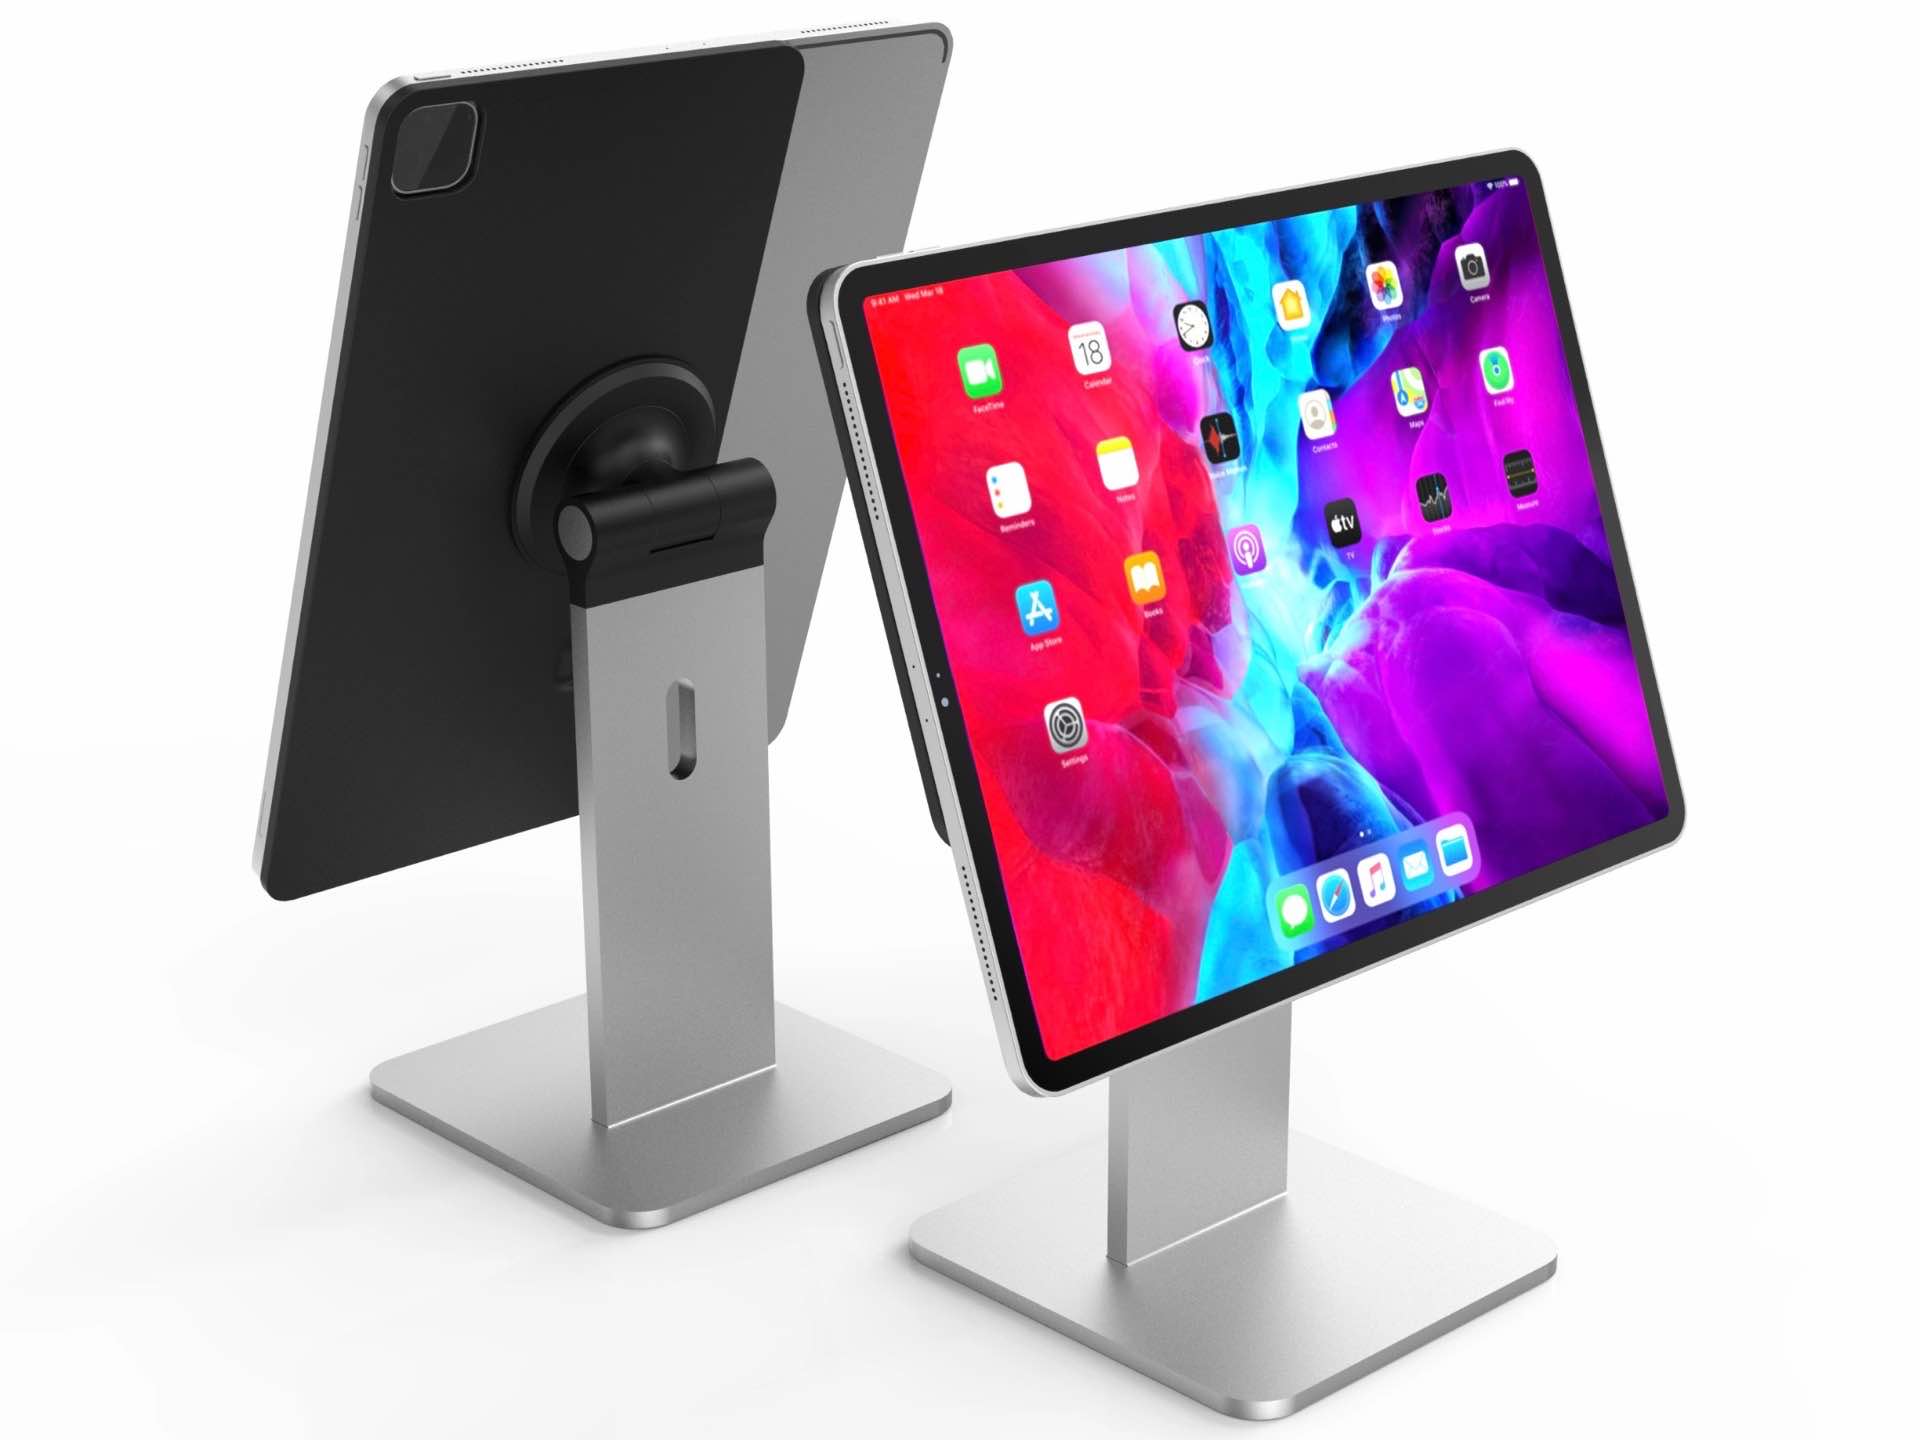 CharJenPro “MagFlött” magnetic stand for iPad and iPad Pro. ($119 for 12.9" size, $109 for 11"/10.9" size)